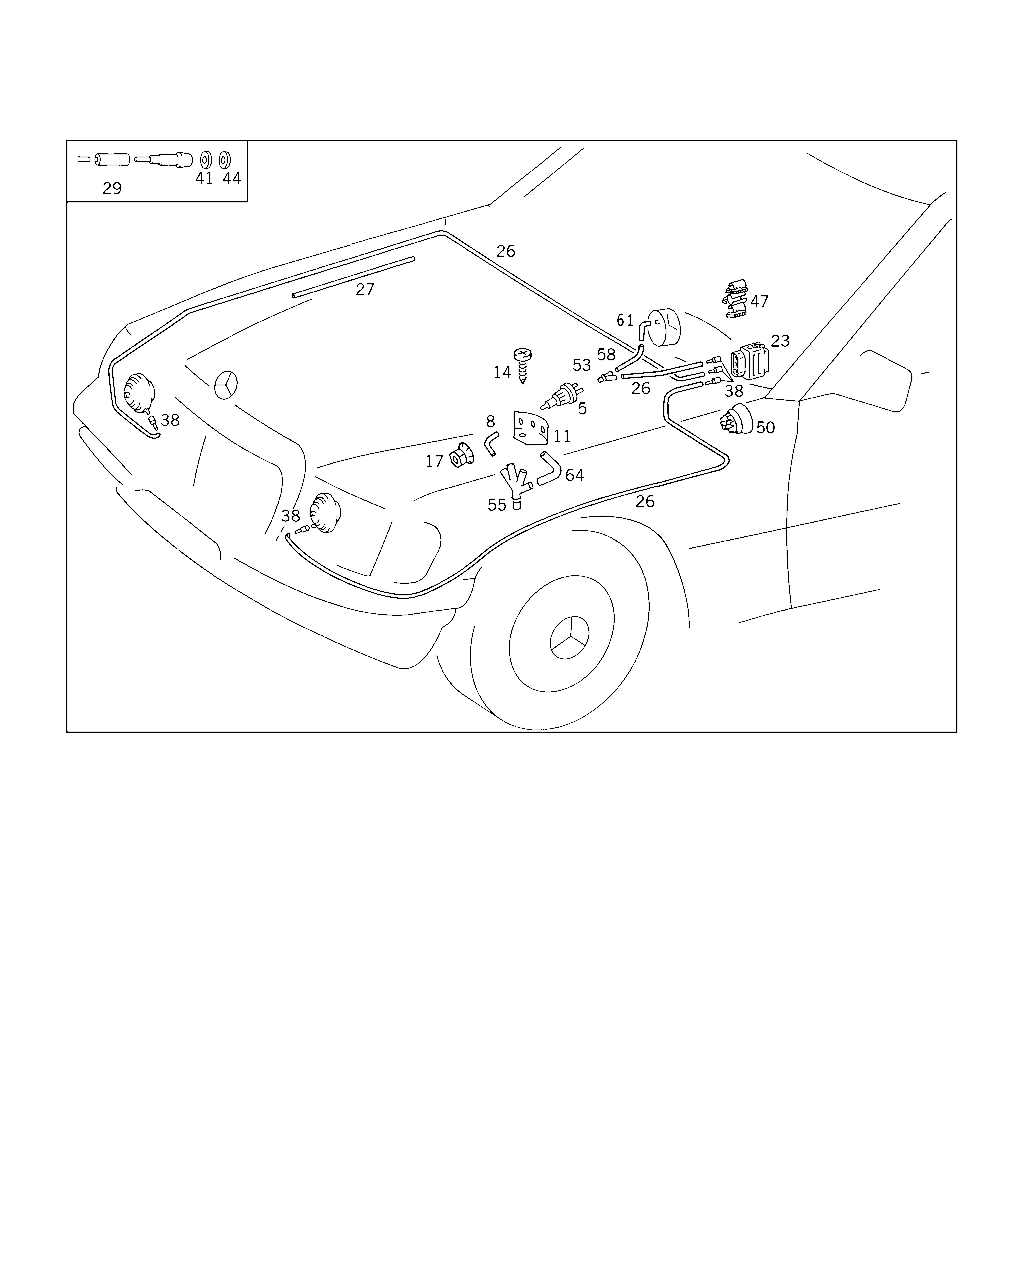 ENGINE VACUUM CONNECTION AND LIGHT RANGE REGULATOR [Car] MERCEDES [EUROPA] [CHASSIS]320